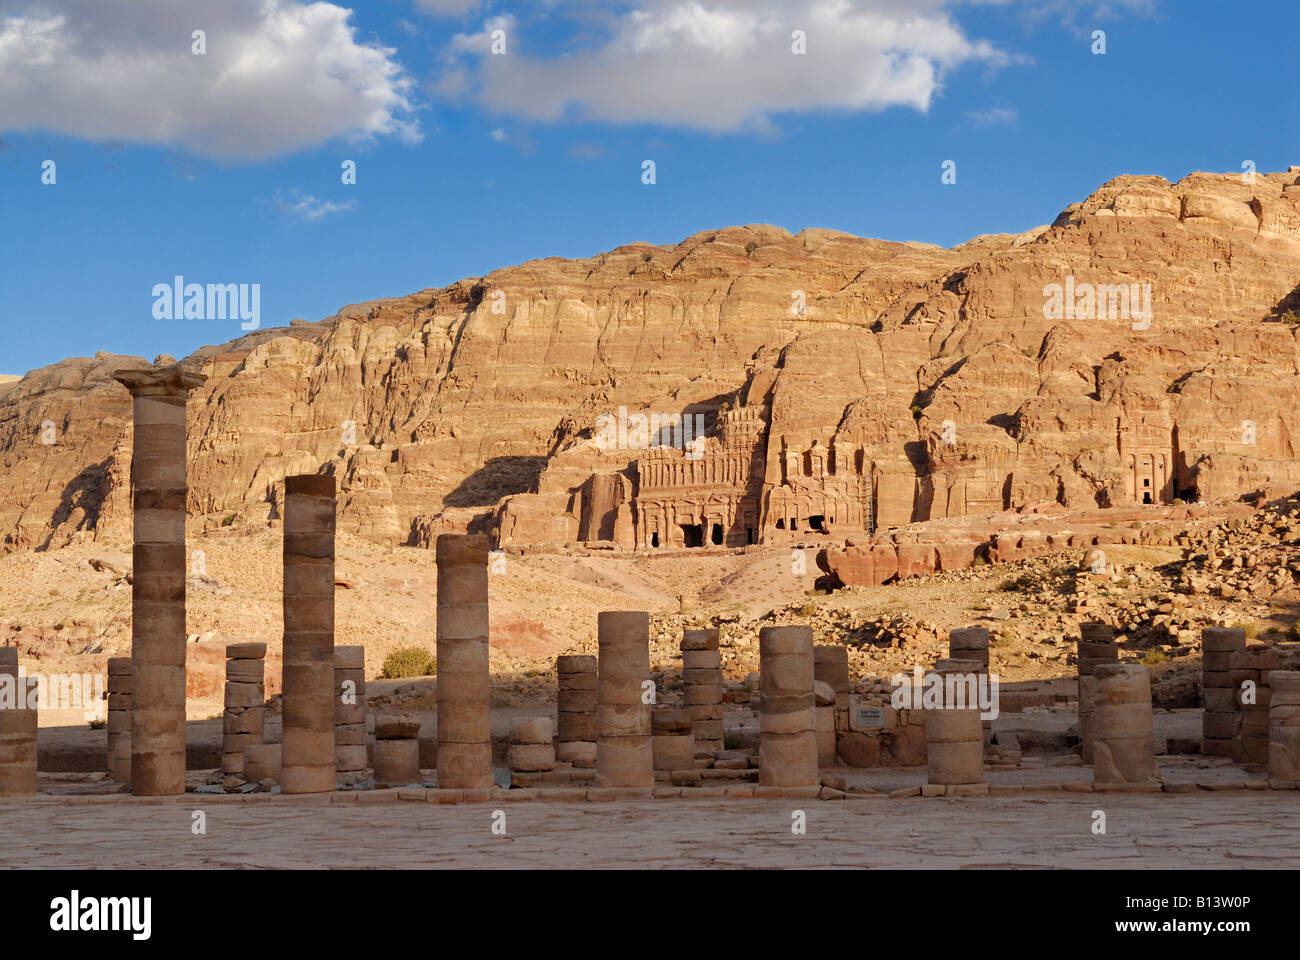 Royal Tombs in front of al Khubtha mountain, columns of the Great Temple Nabataean ancient town Petra Jordan Arabia Stock Photo